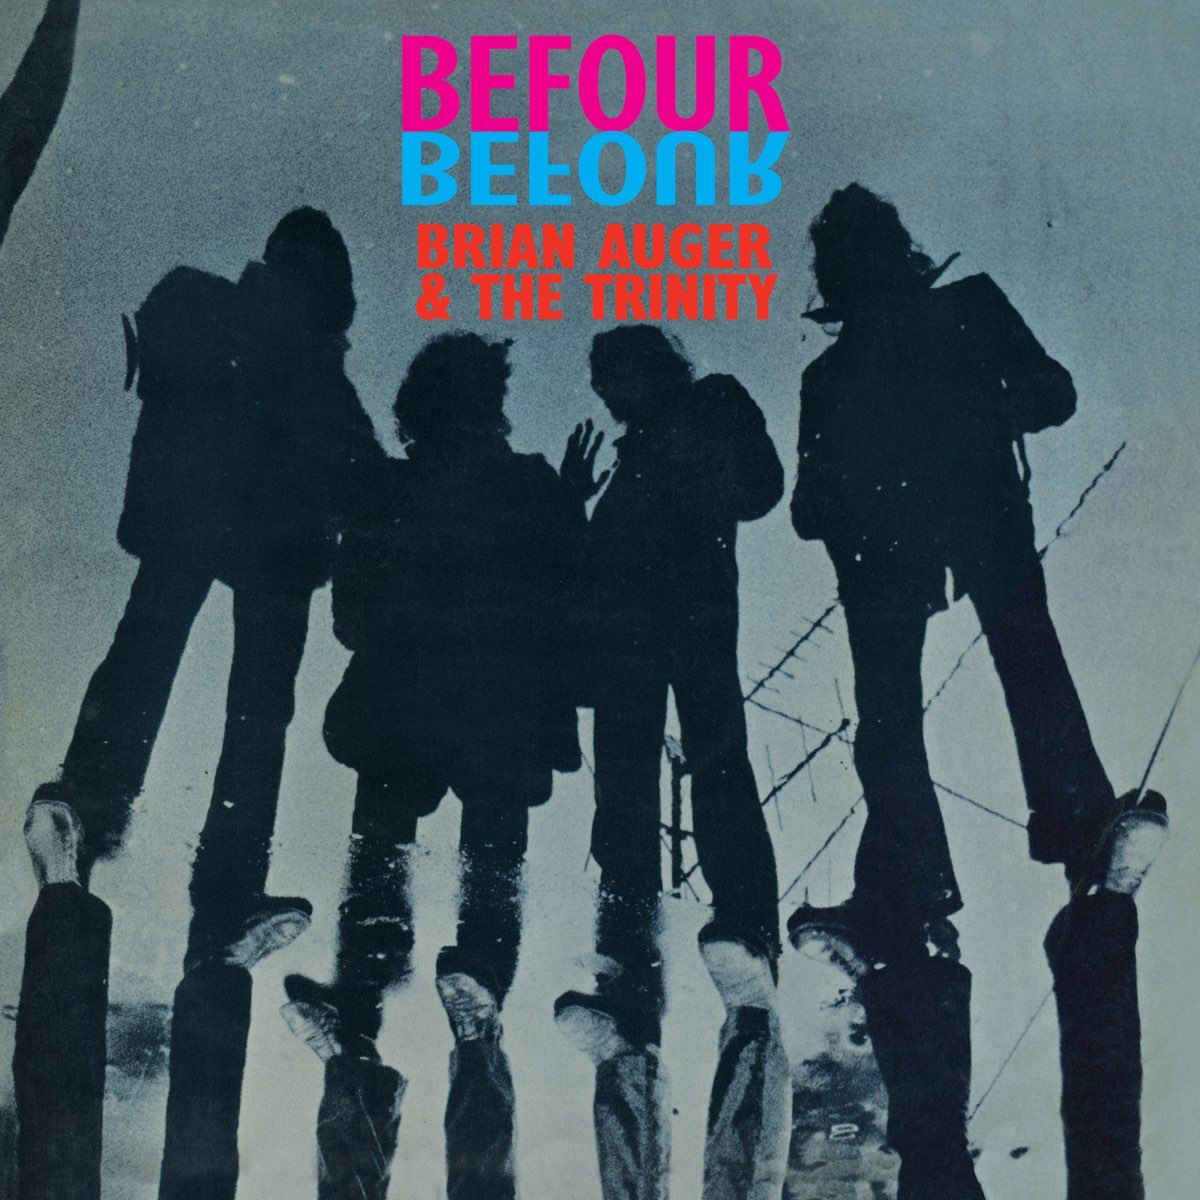 ‎Befour - Album by Brian Auger & Brian Auger & The Trinity - Apple Music